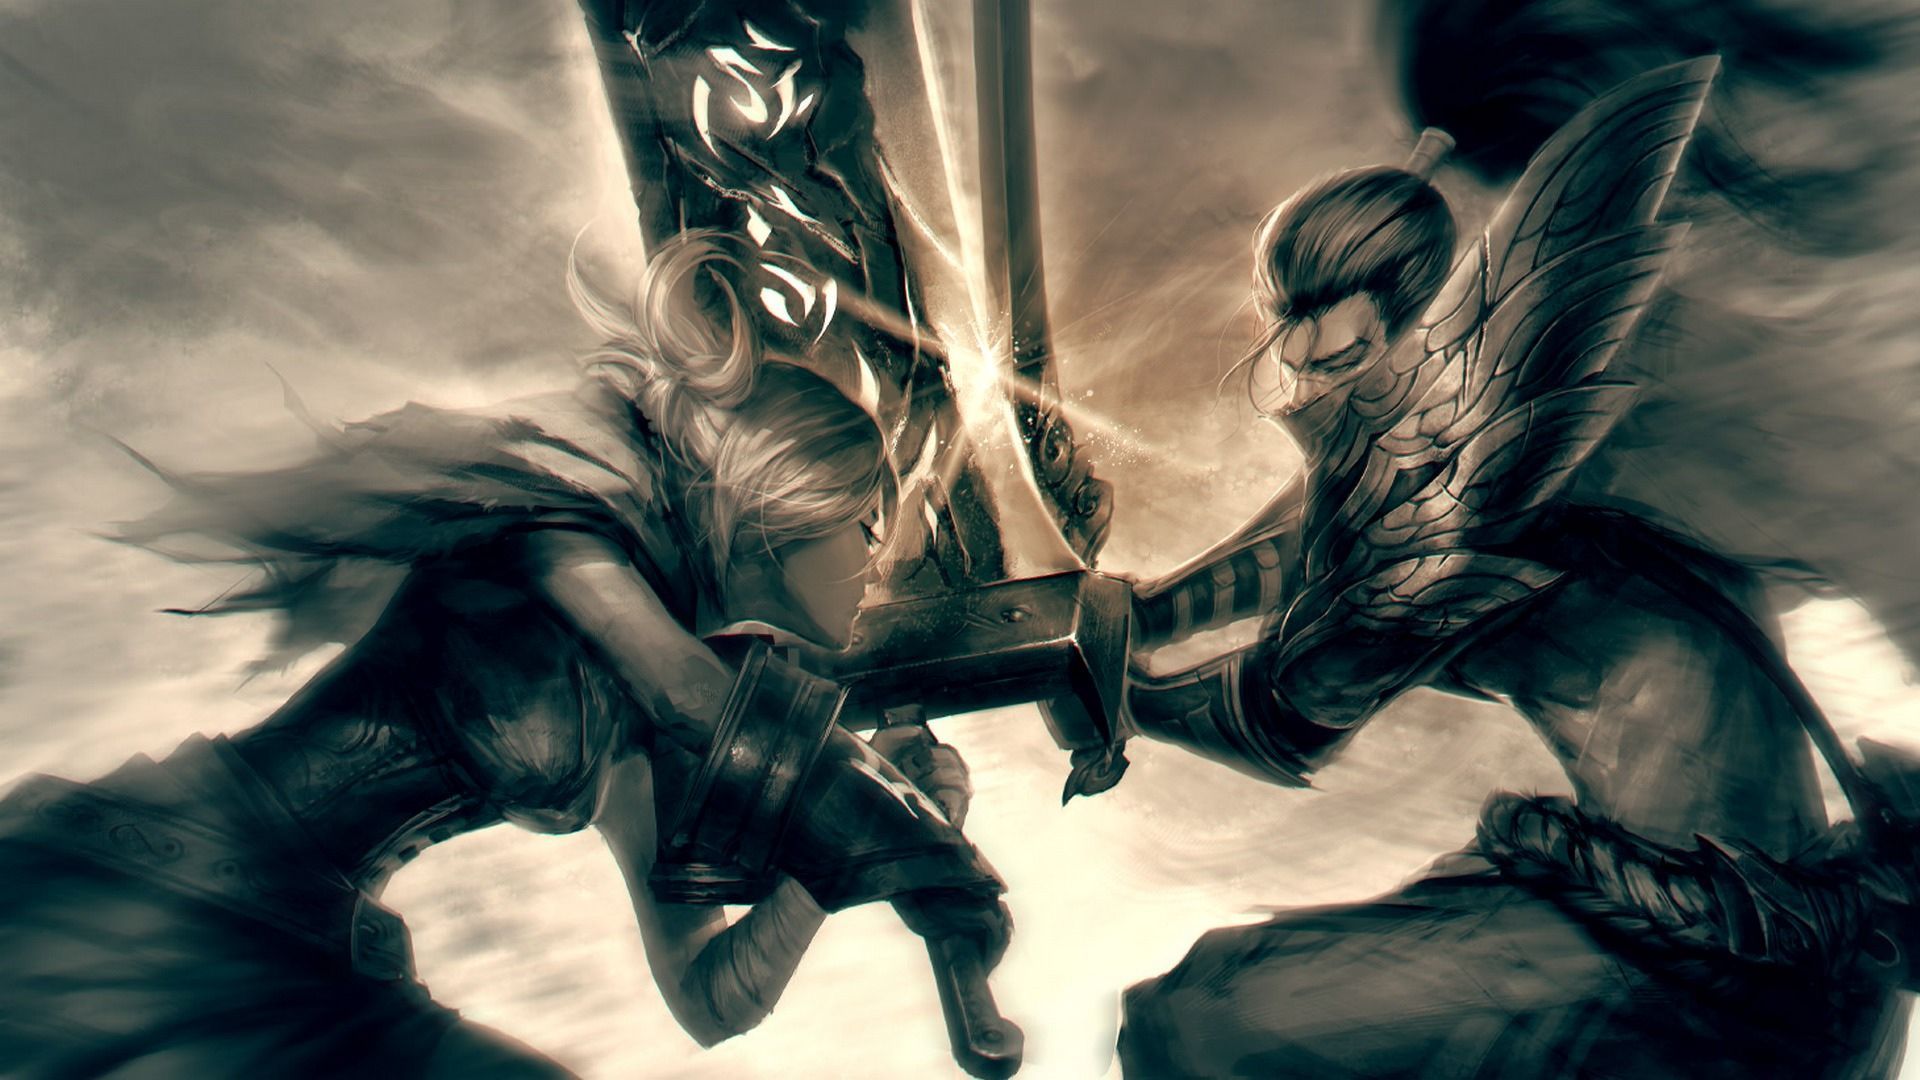 Download Wallpaper 1920x1080 League of legends, Yasuo, Riven, The